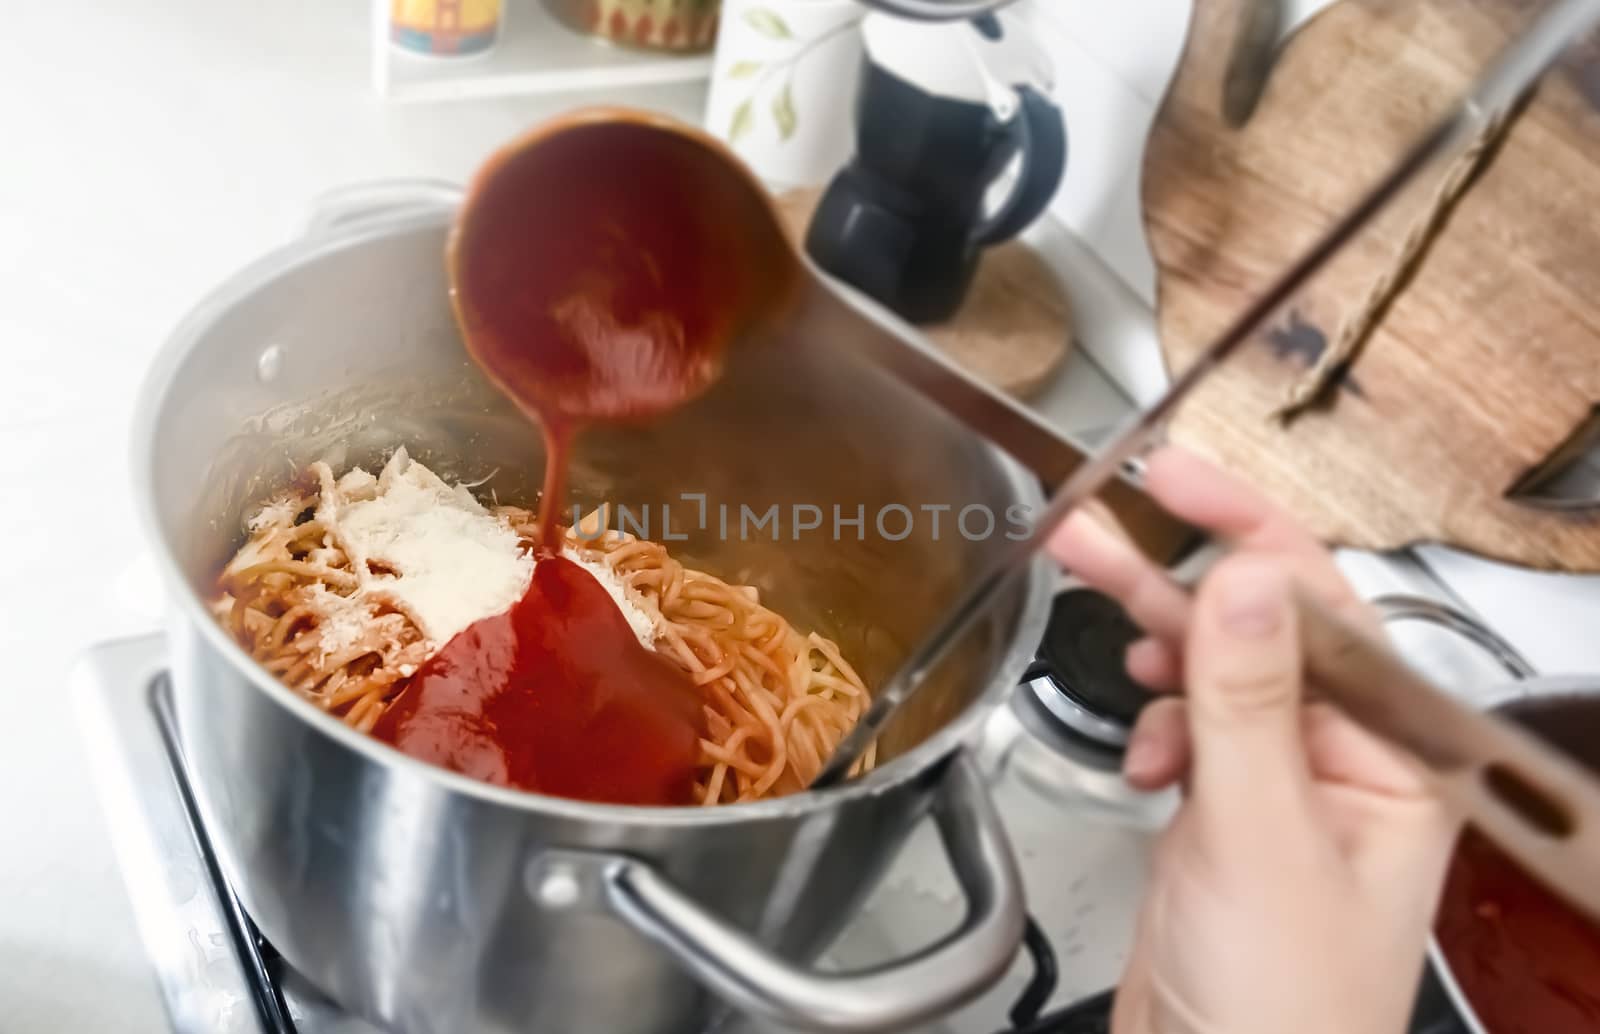 Seasoning a pan full of freshly cooked spaghetti by pouring the tomato sauce with a steel ladle by rarrarorro